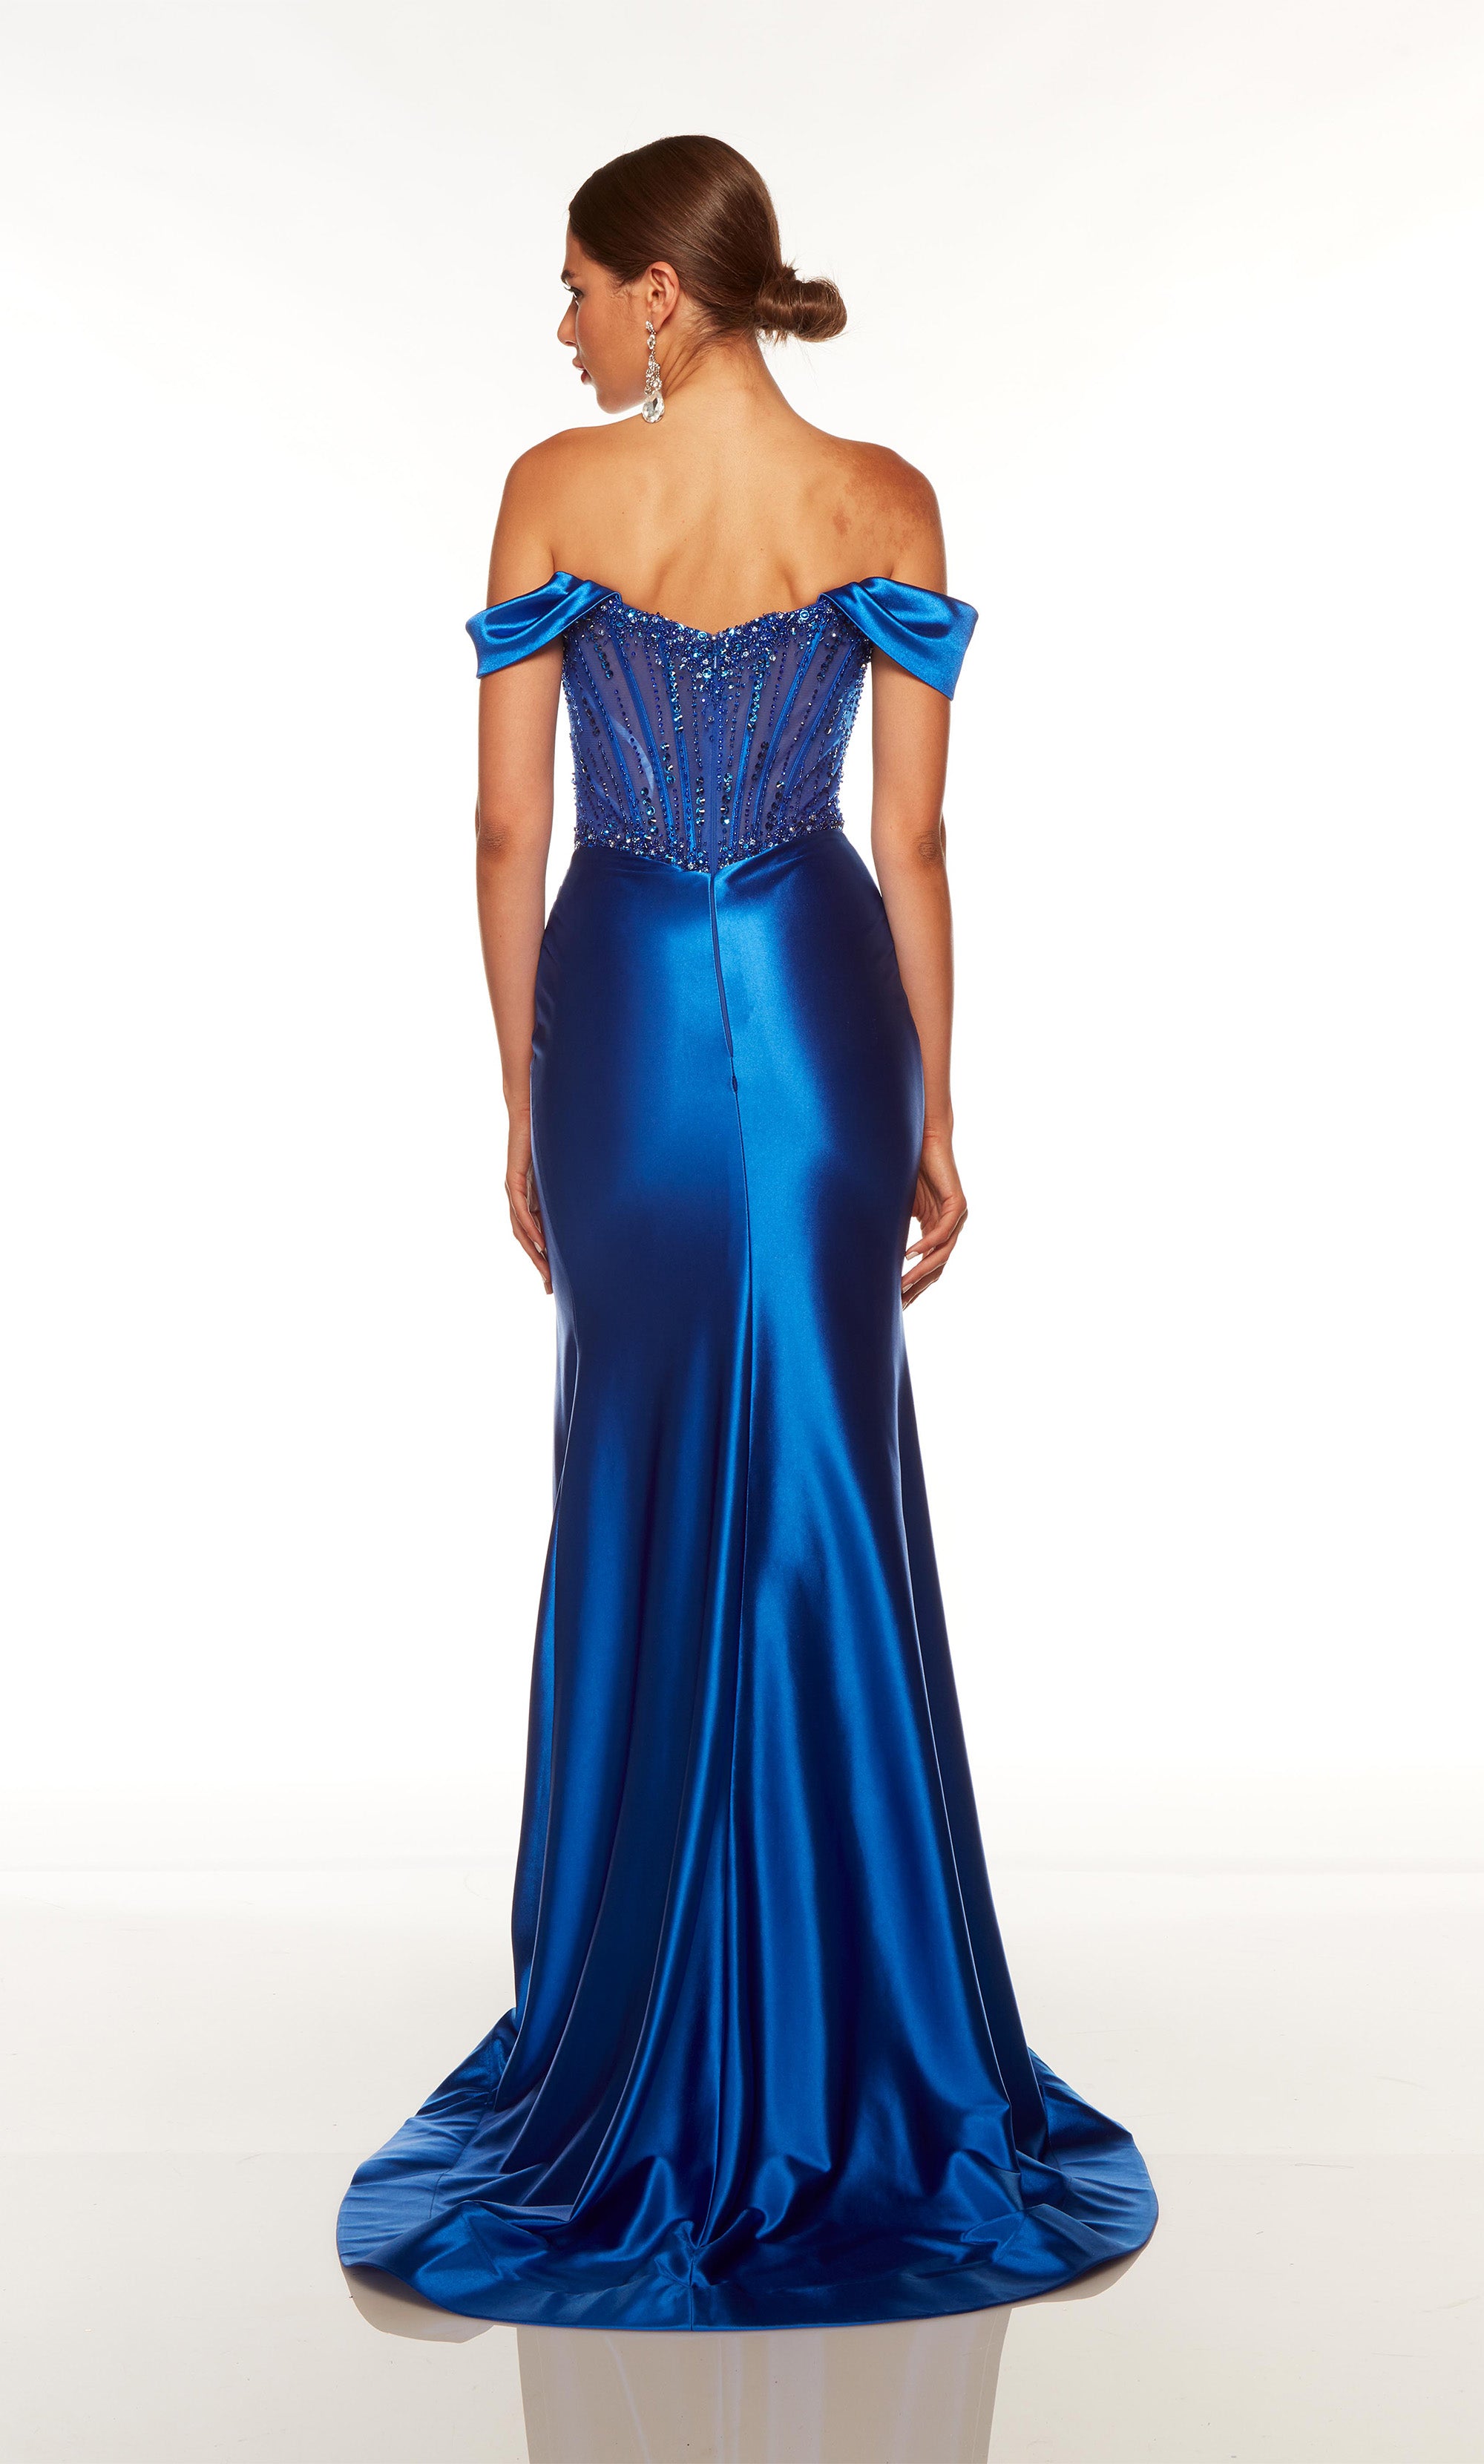 Royal blue corset prom dress with a sheer embellished bodice, ruching detail, and front slit. COLOR-SWATCH_61471__ROYAL